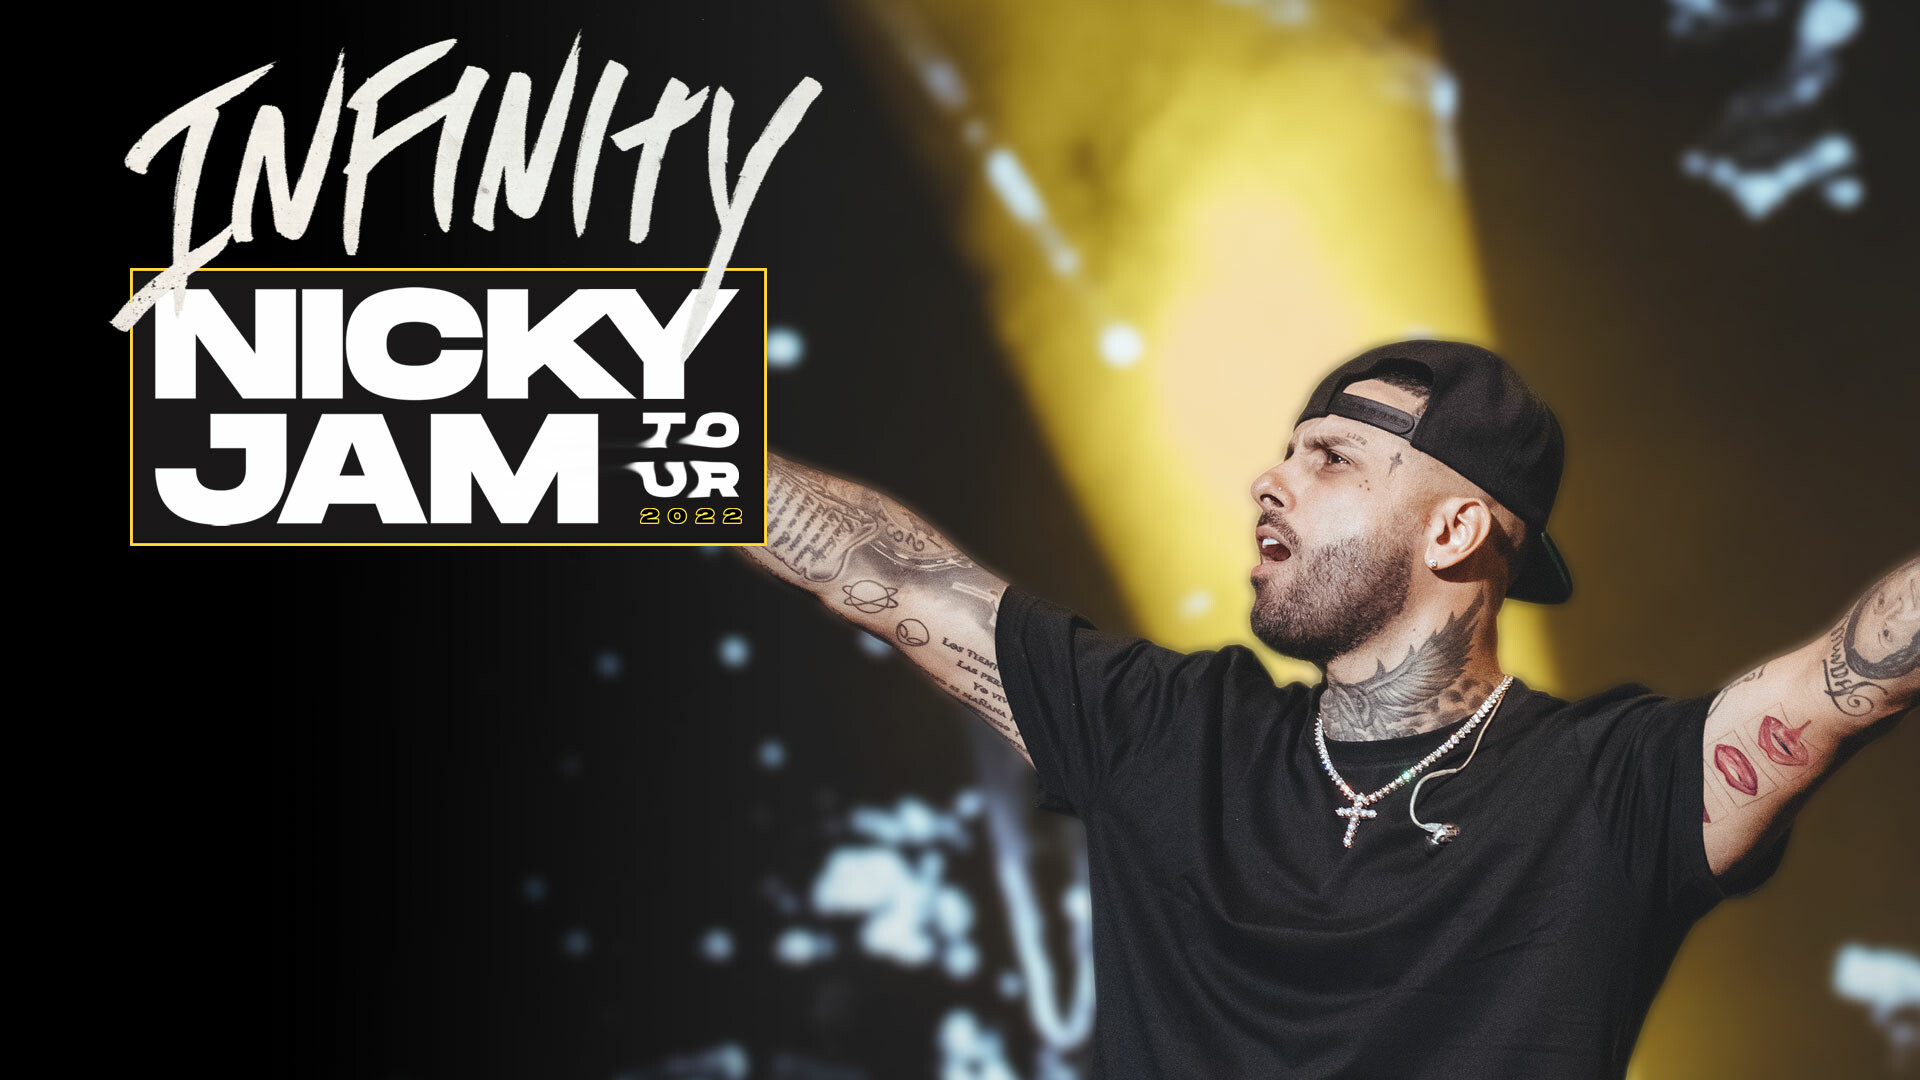 Nicky Jam, Infinity tour, Live concert, Amazing stage production, 1920x1080 Full HD Desktop